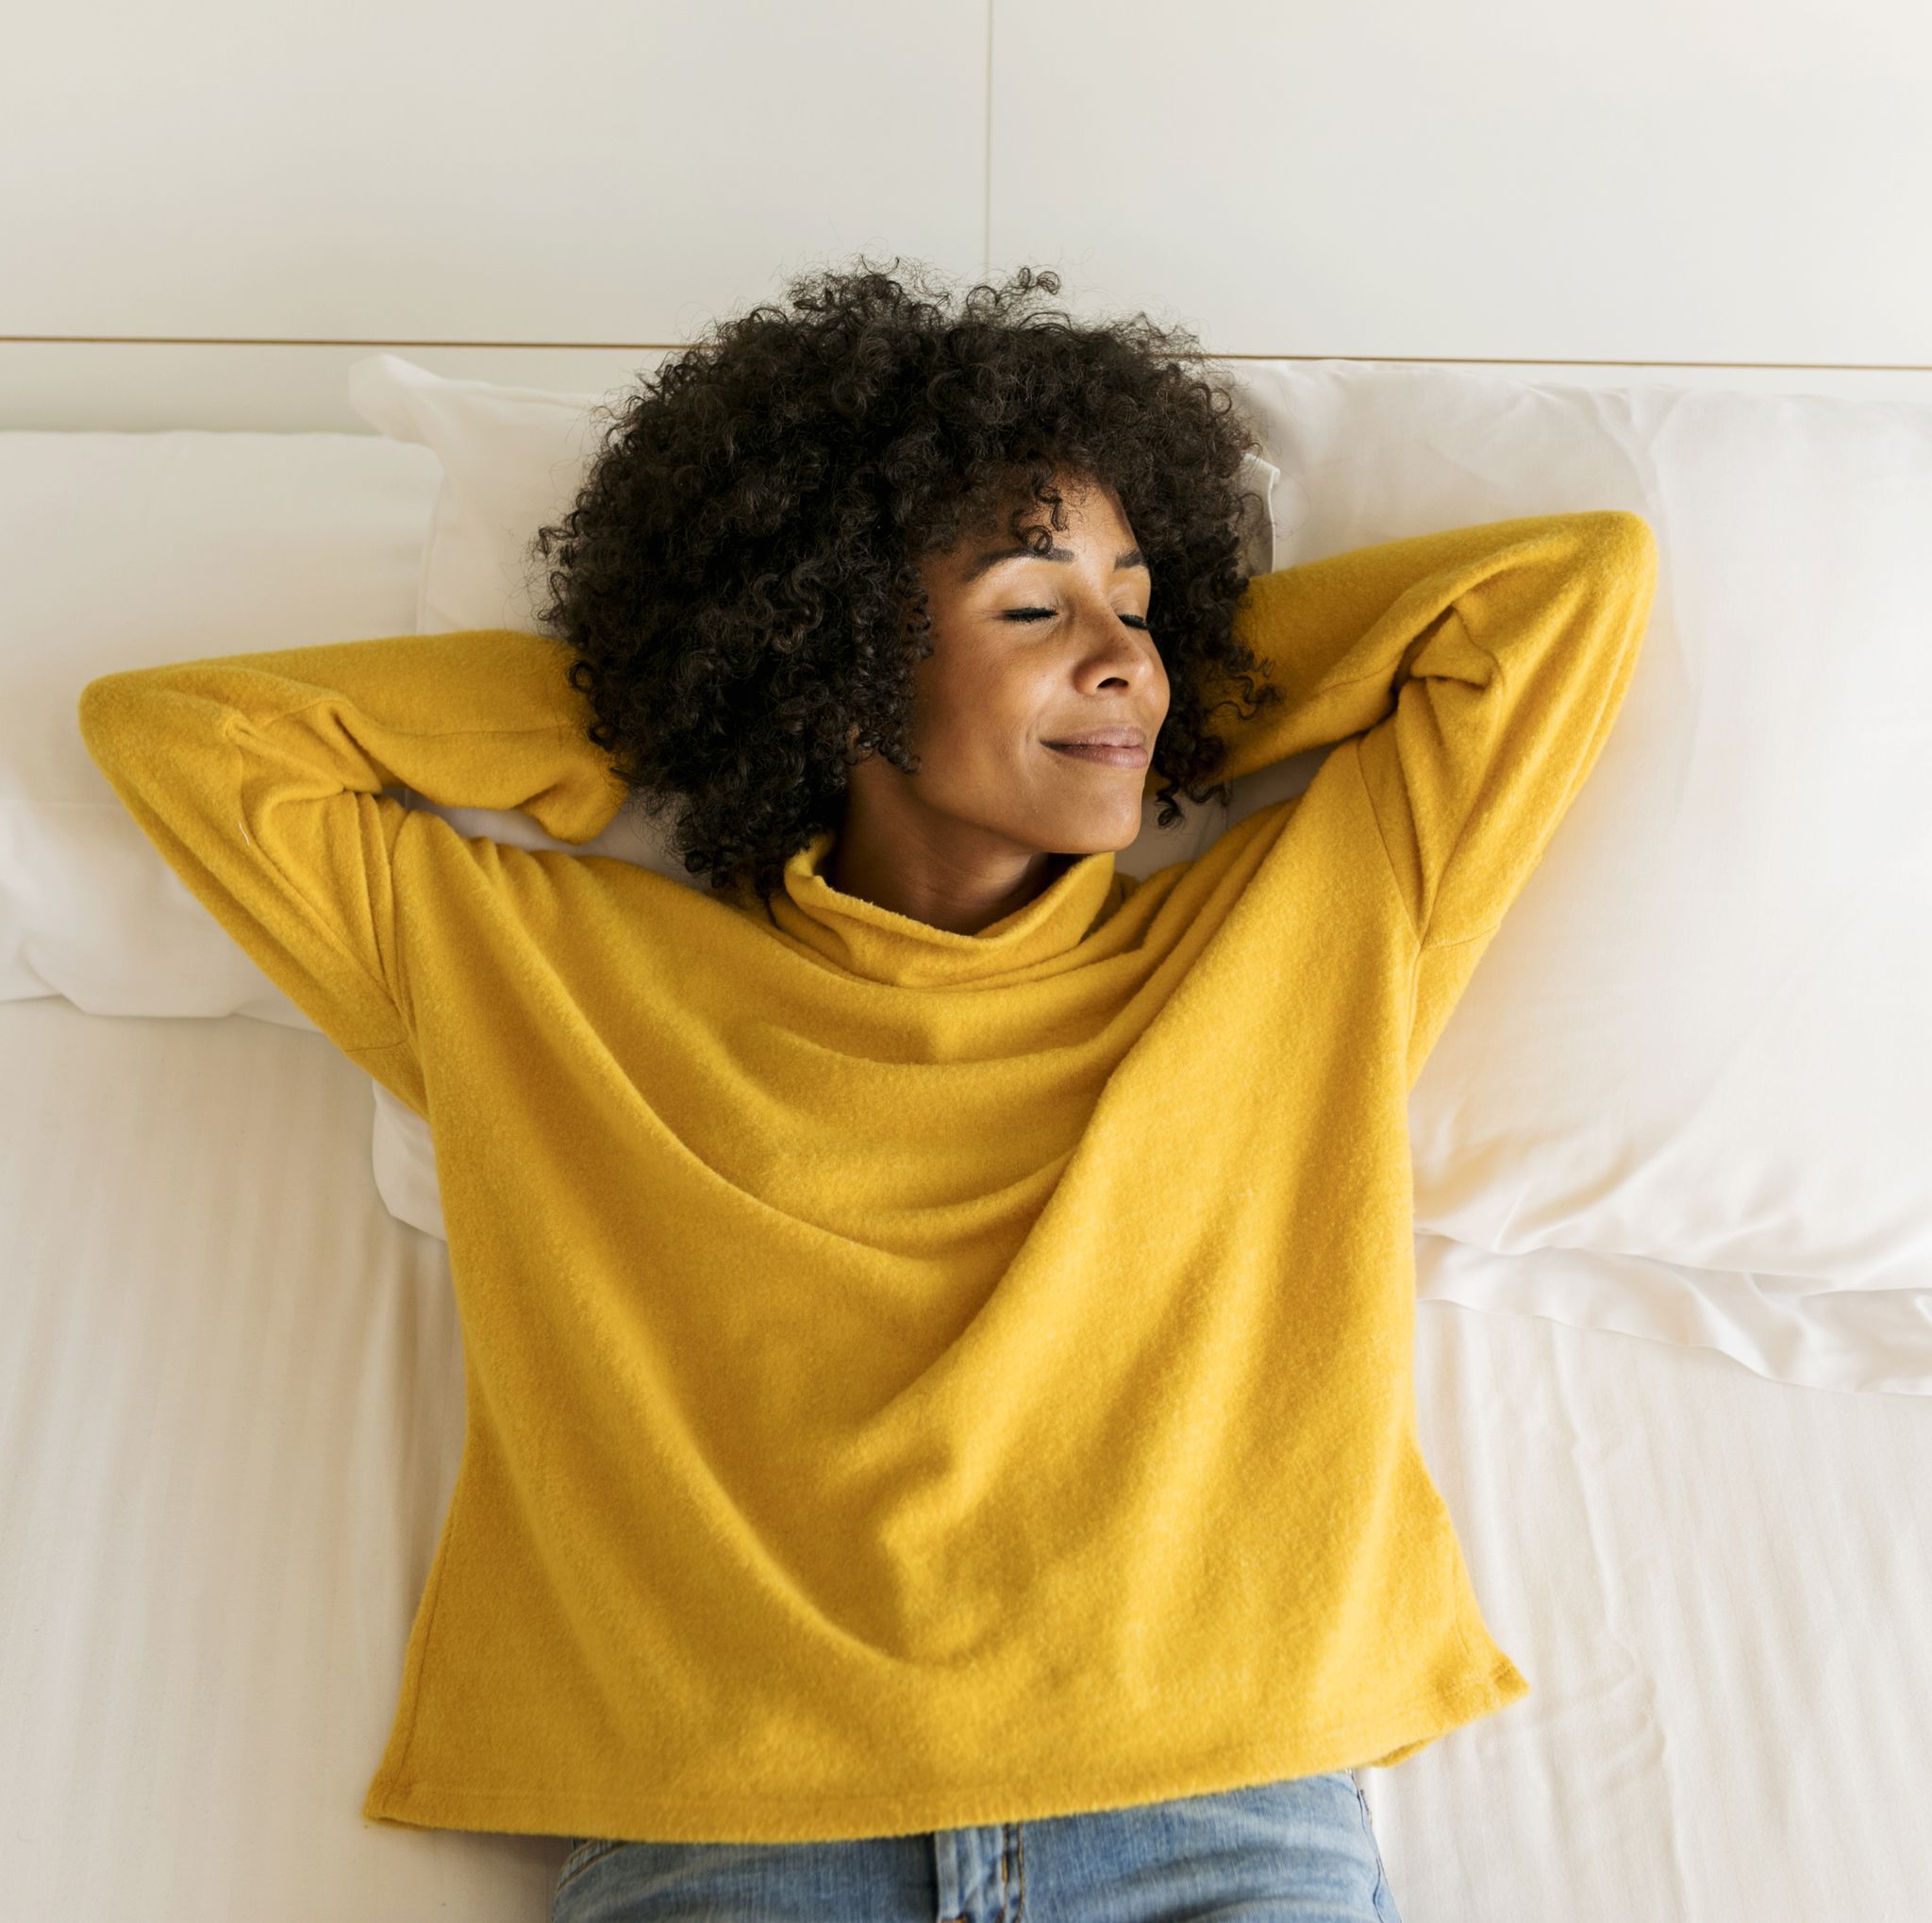 Smiling woman with closed eyes lying on bed